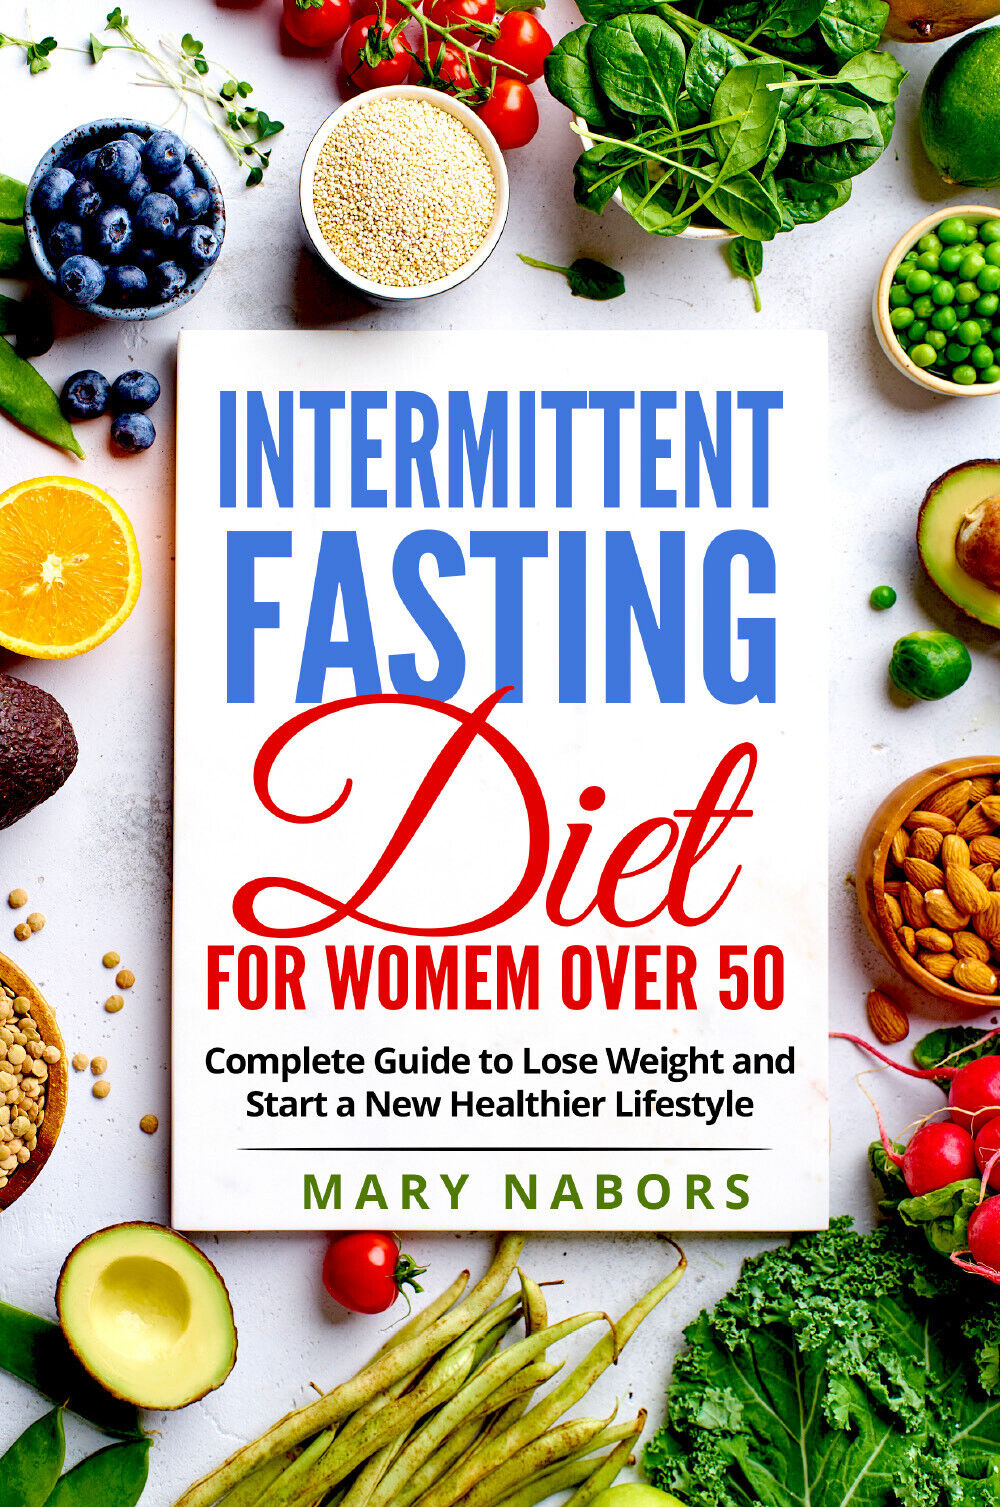 Intermittent fasting diet for women OVER 50 di Mary Nabors,  2021,  Youcanprint libro usato